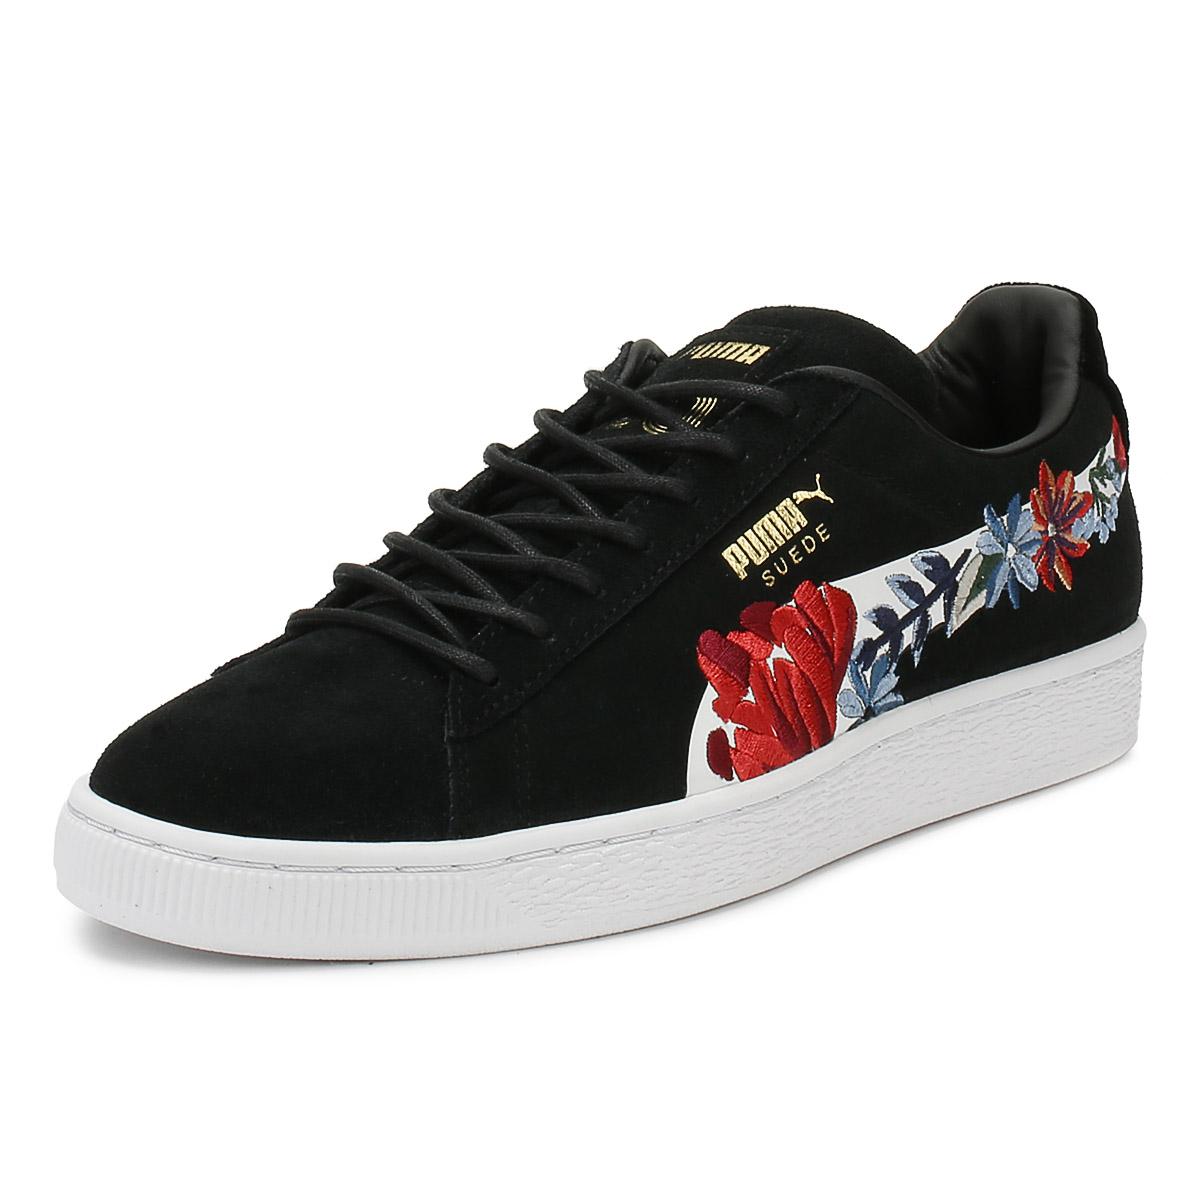 puma black suede classic embroidered trainers